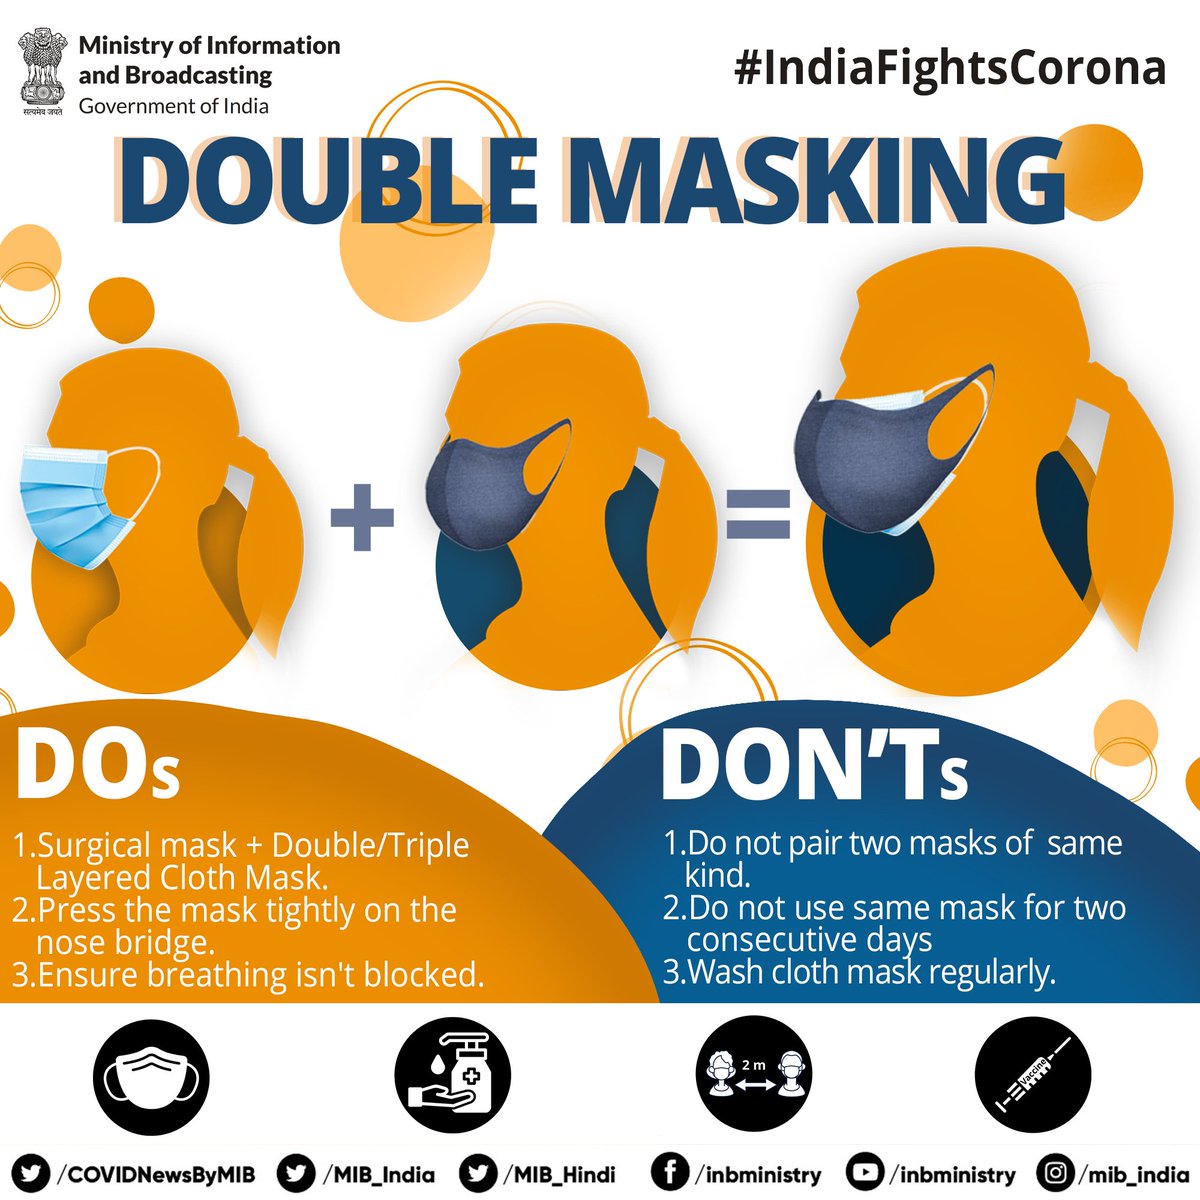 #IndiaFightsCorona:

📍#DoubleMasking

➡️ Do's👍
☑️Surgical mask + double/triple layer cloth mask
☑️Press the mask tightly on the nose bridge

➡️Don'ts👎
☑️Do not pair two masks of same kind
☑️Do not use same mask for two consecutive days

#Unite2FightCorona
#StaySafeStayHealthy